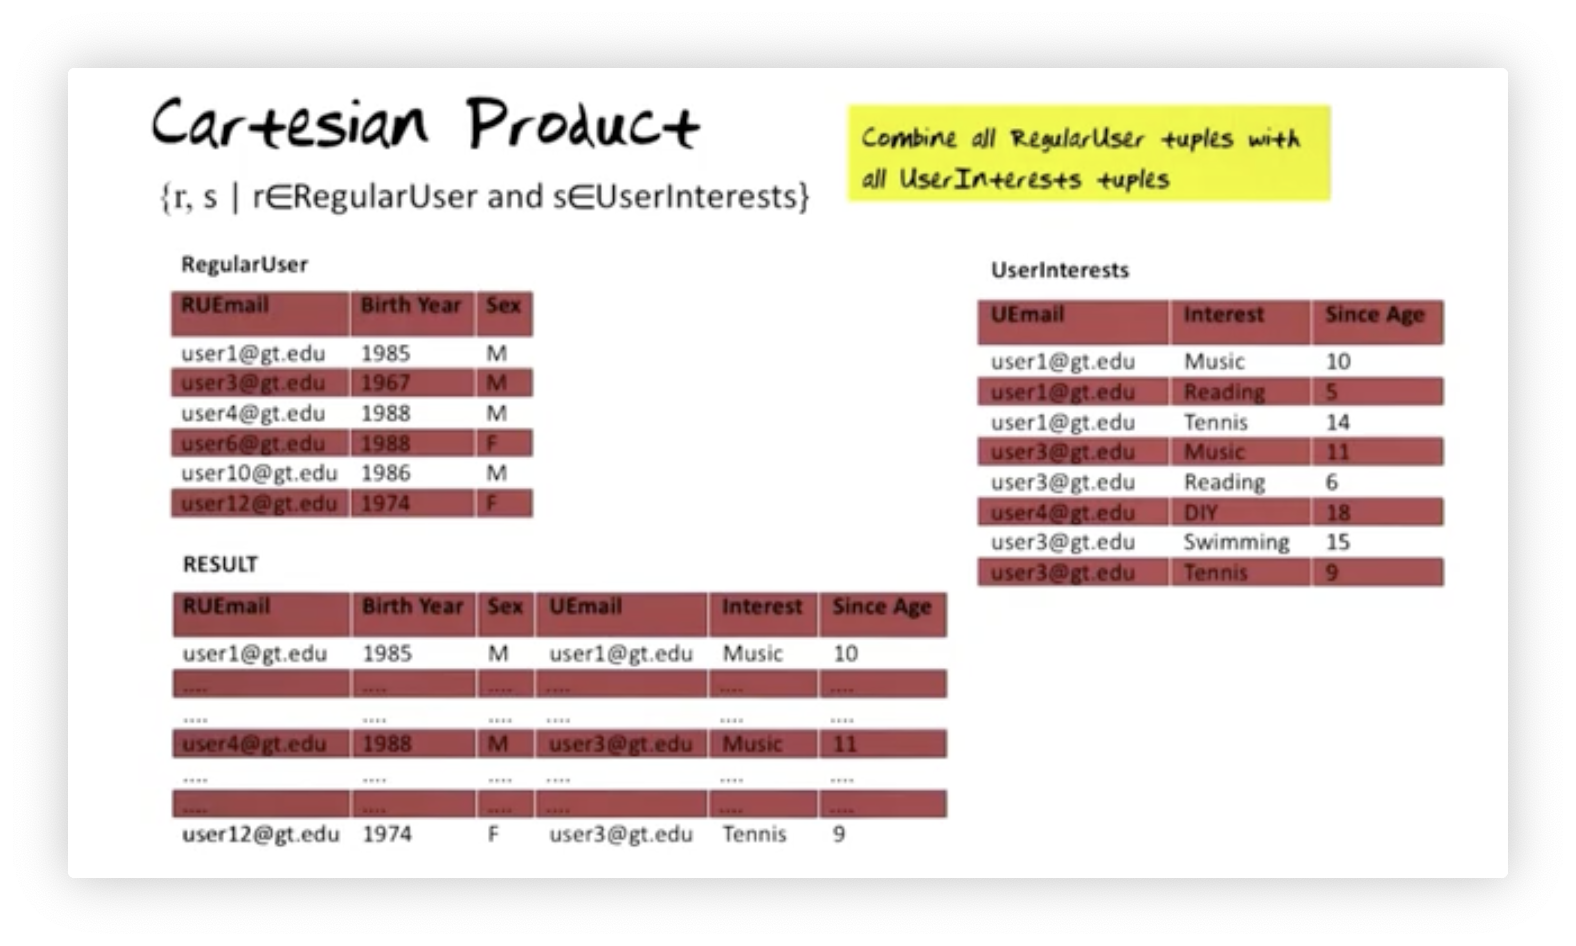 Using the Cartesian product to combine every tuple in RegularUser with every
tuple in UserInterests.